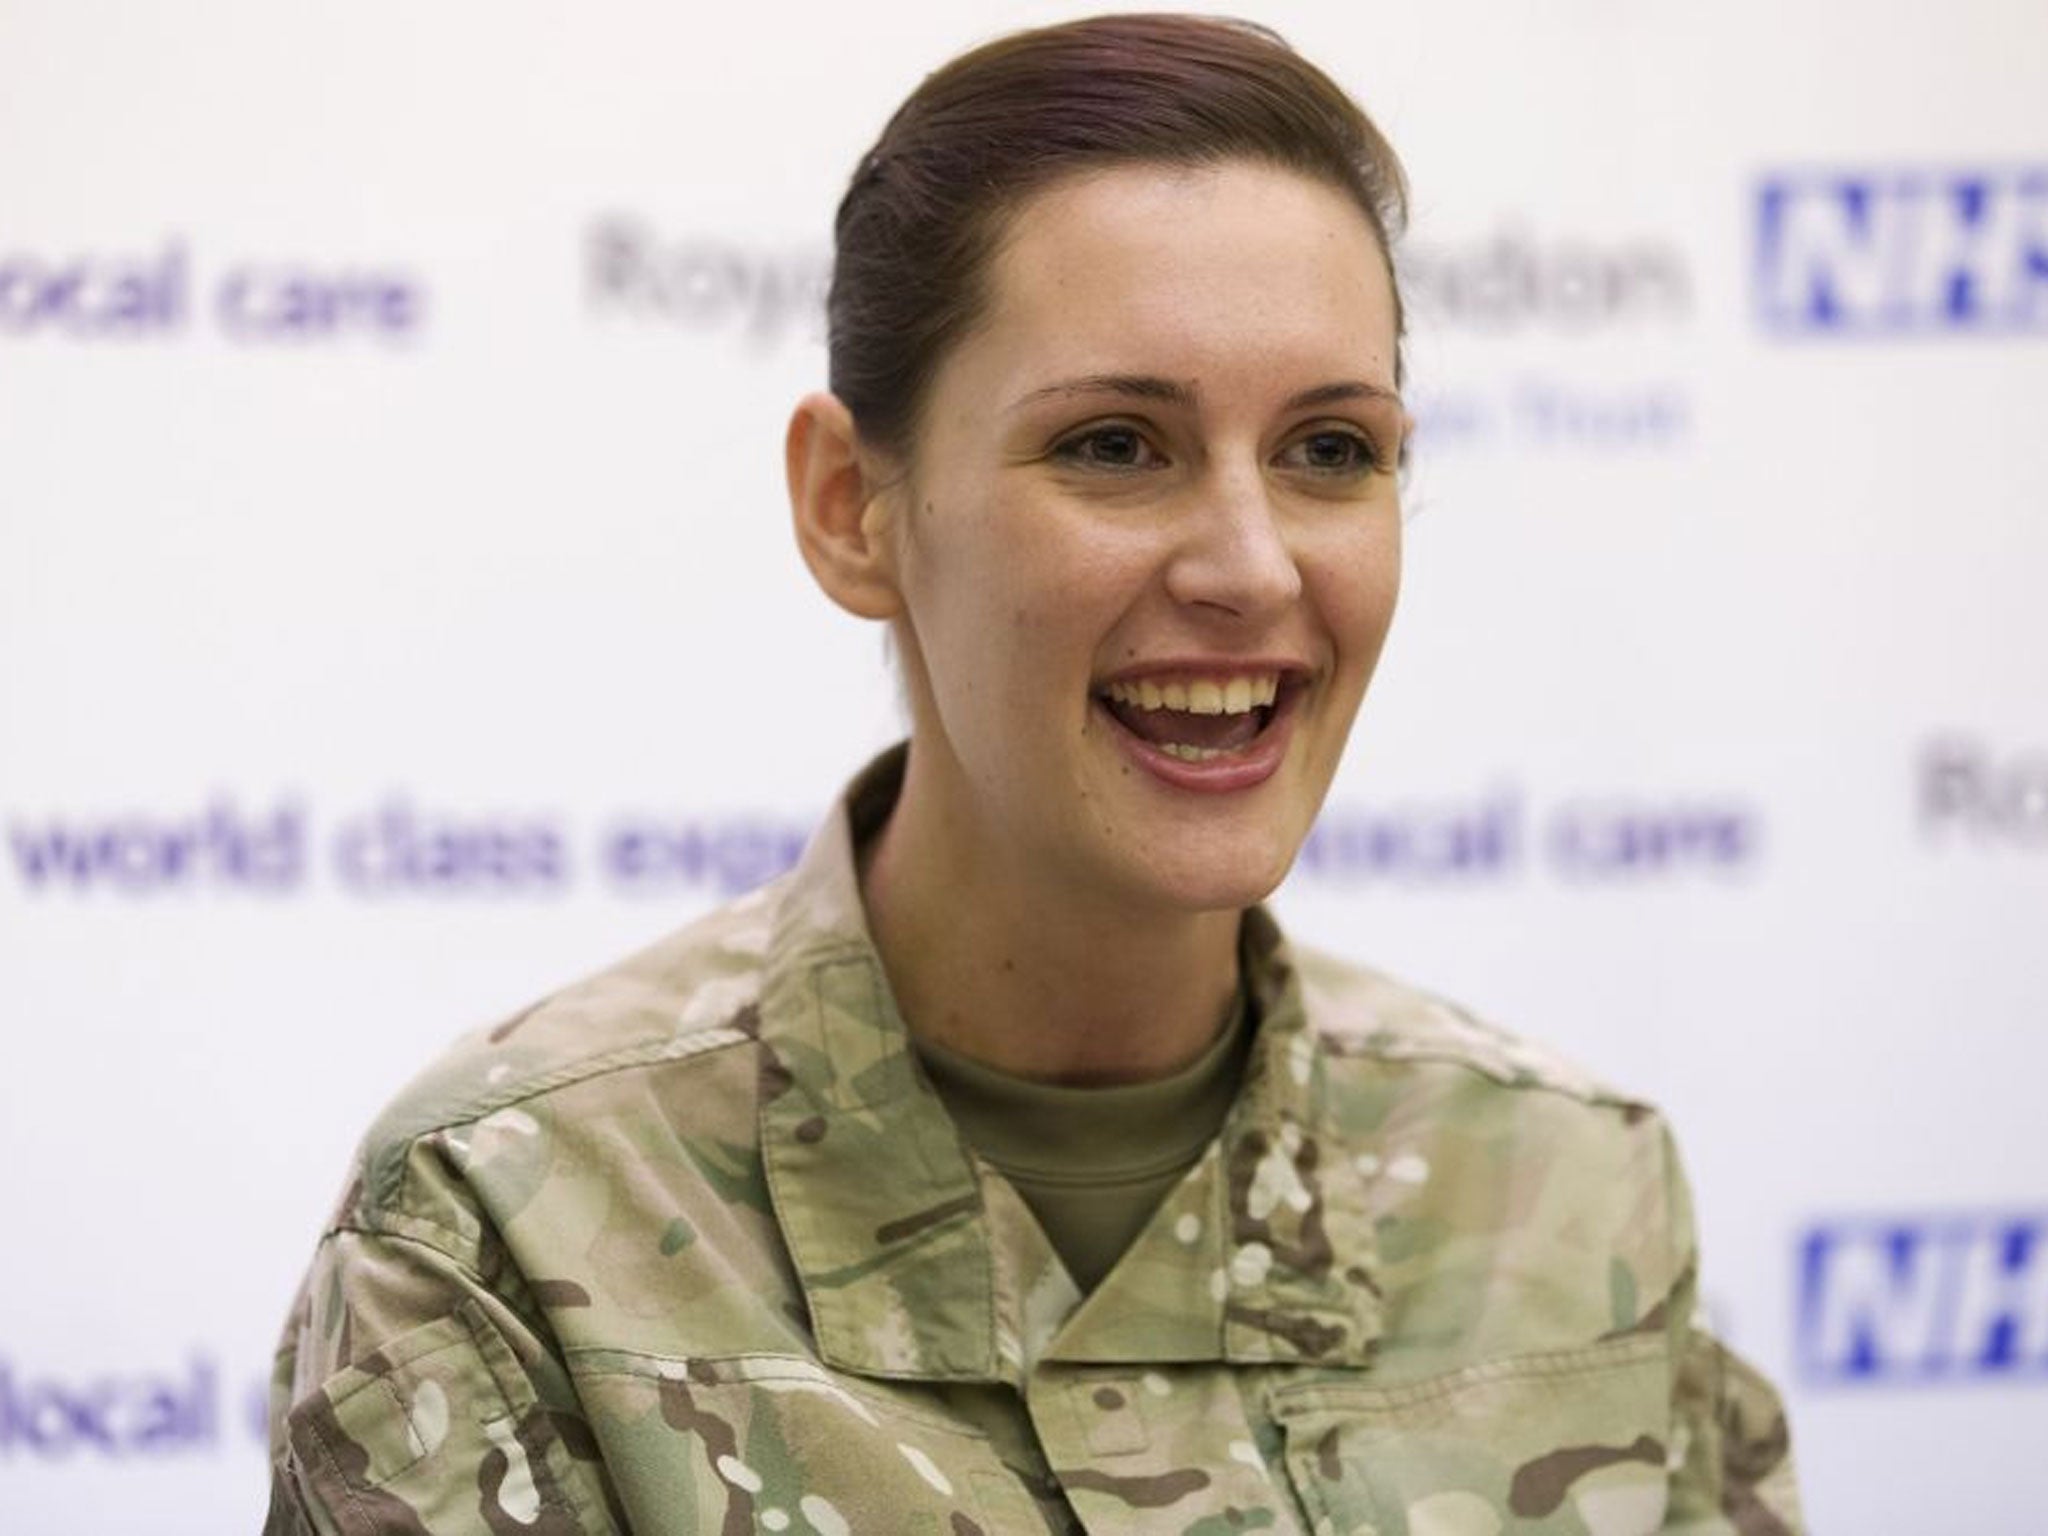 Corporal Anna Cross holds a press conference at the Royal Free Hospital in London on March 27, 2015. Army reservist, Anna Cross has recovered from the Ebola virus and been discharged today after being the first patient in the world to have received a new